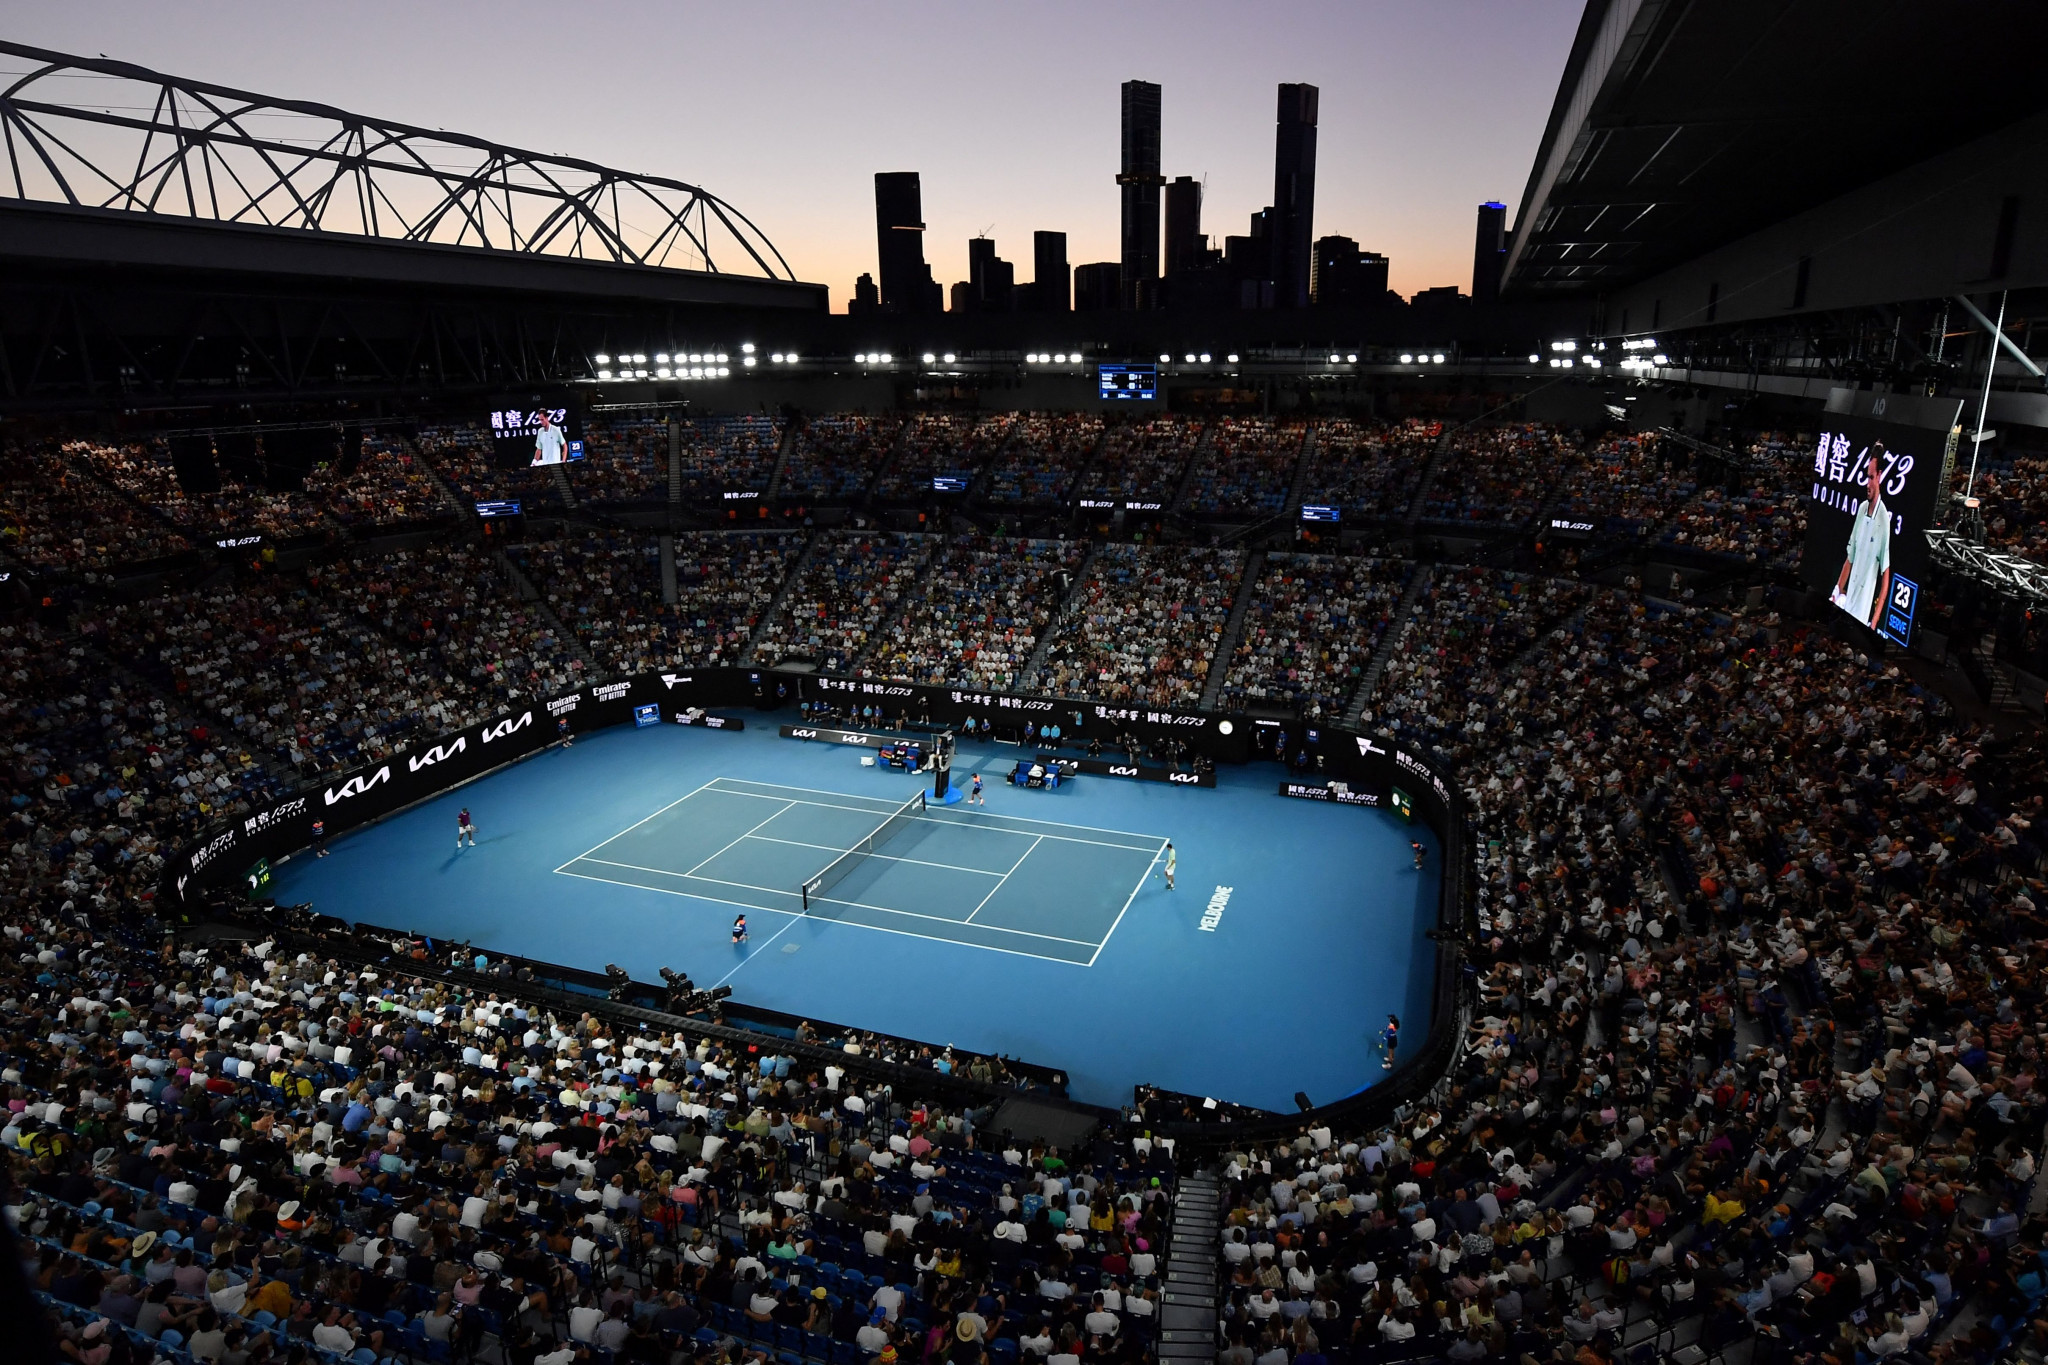 The Rod Laver Arena is one of tennis marquee venues named after one of the sport's greats ©Getty Images